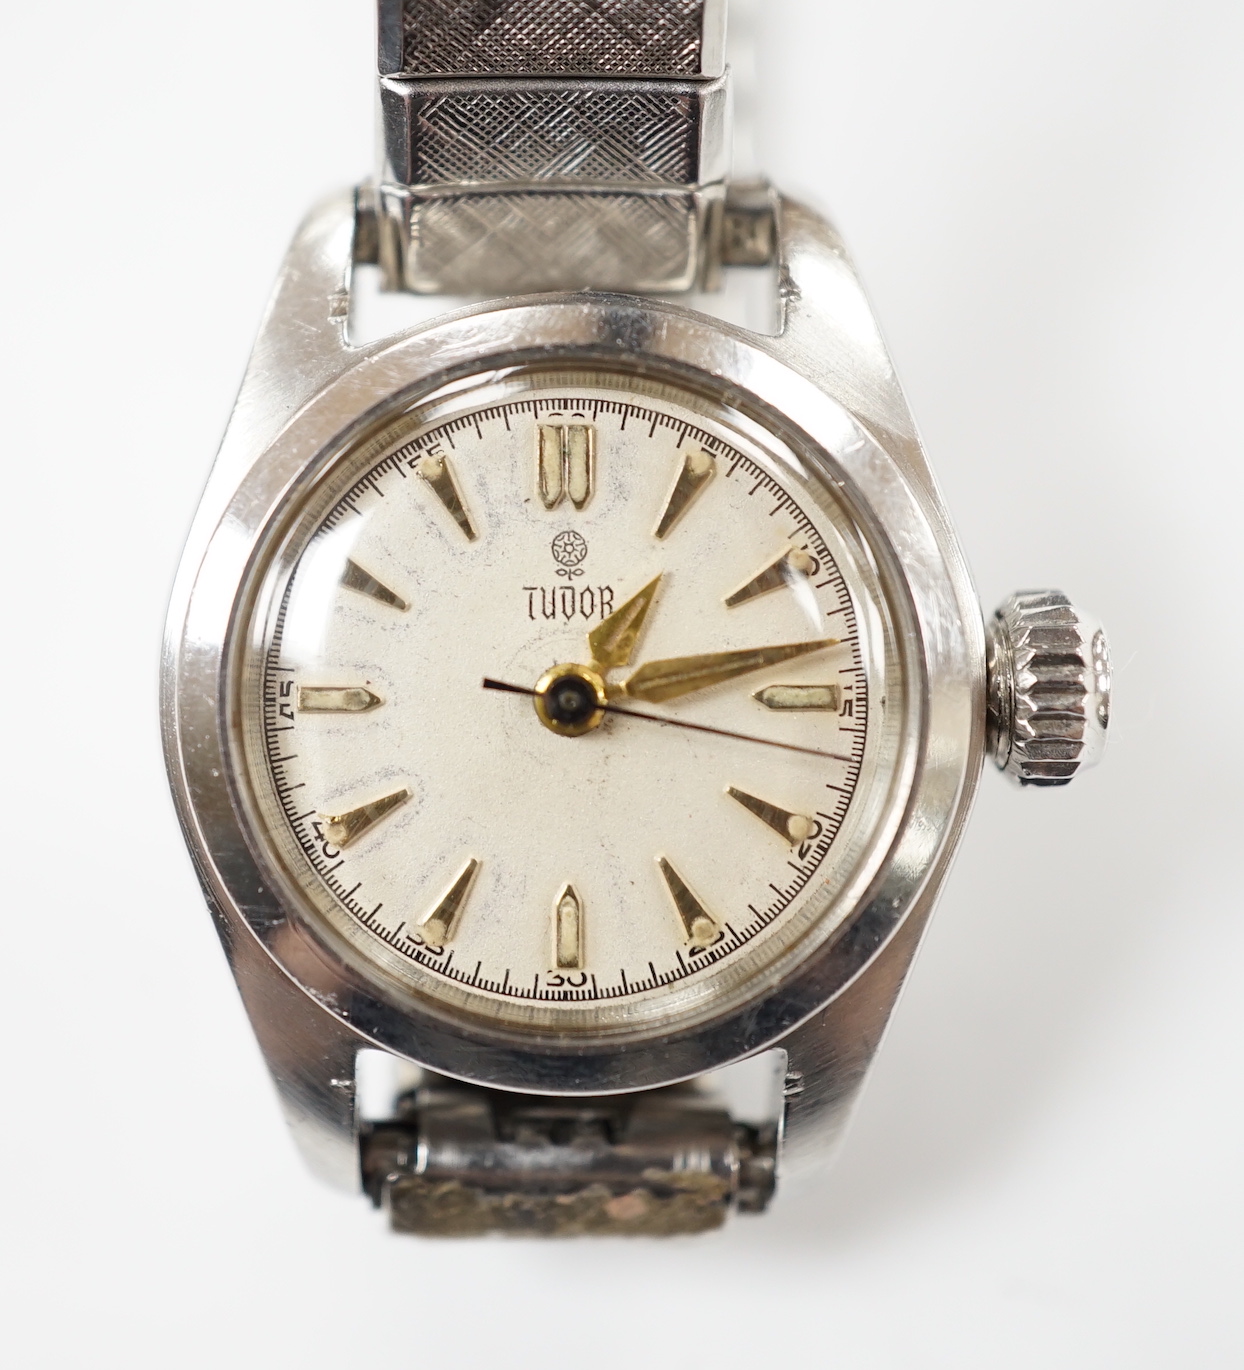 A lady's stainless steel Tudor manual wind wrist watch, with baton numerals, on an associated